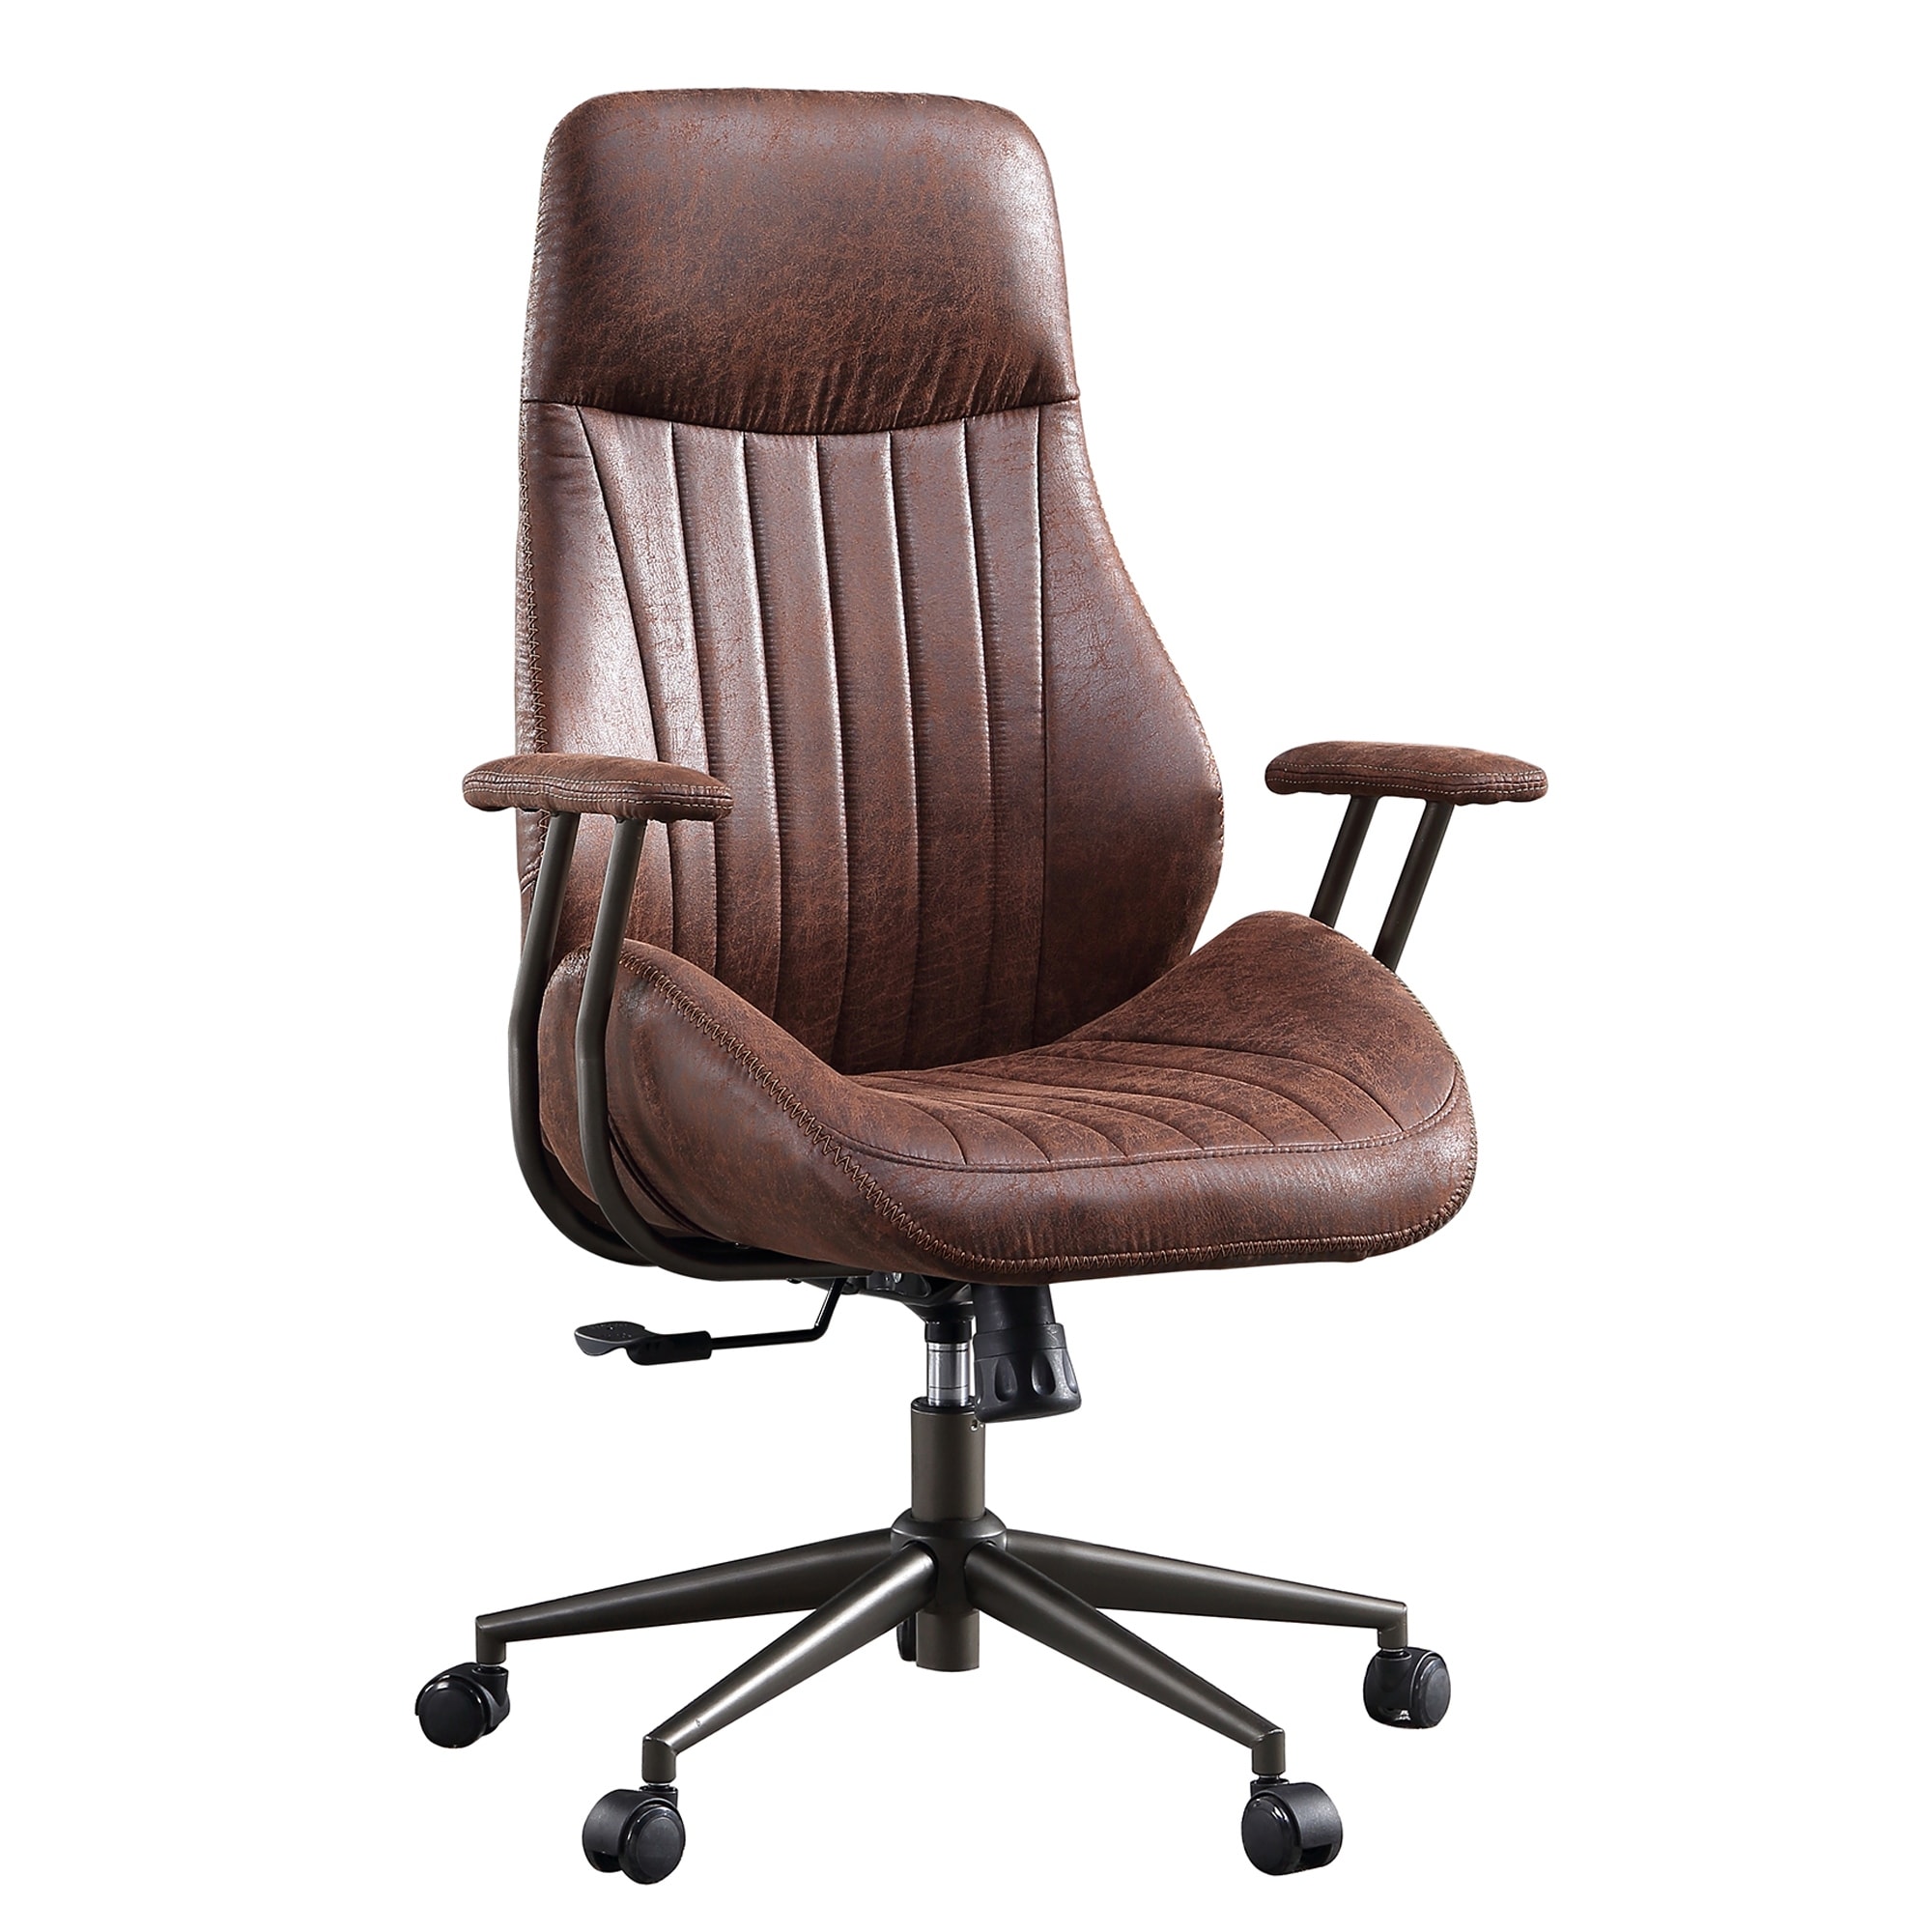 https://ak1.ostkcdn.com/images/products/is/images/direct/9bed0e45d1d2be396953b4525d09abda9ca95b54/OVIOS-Suede-Fabric-Ergonomic-Office-Chair-High-Back-Lumbar-Support.jpg